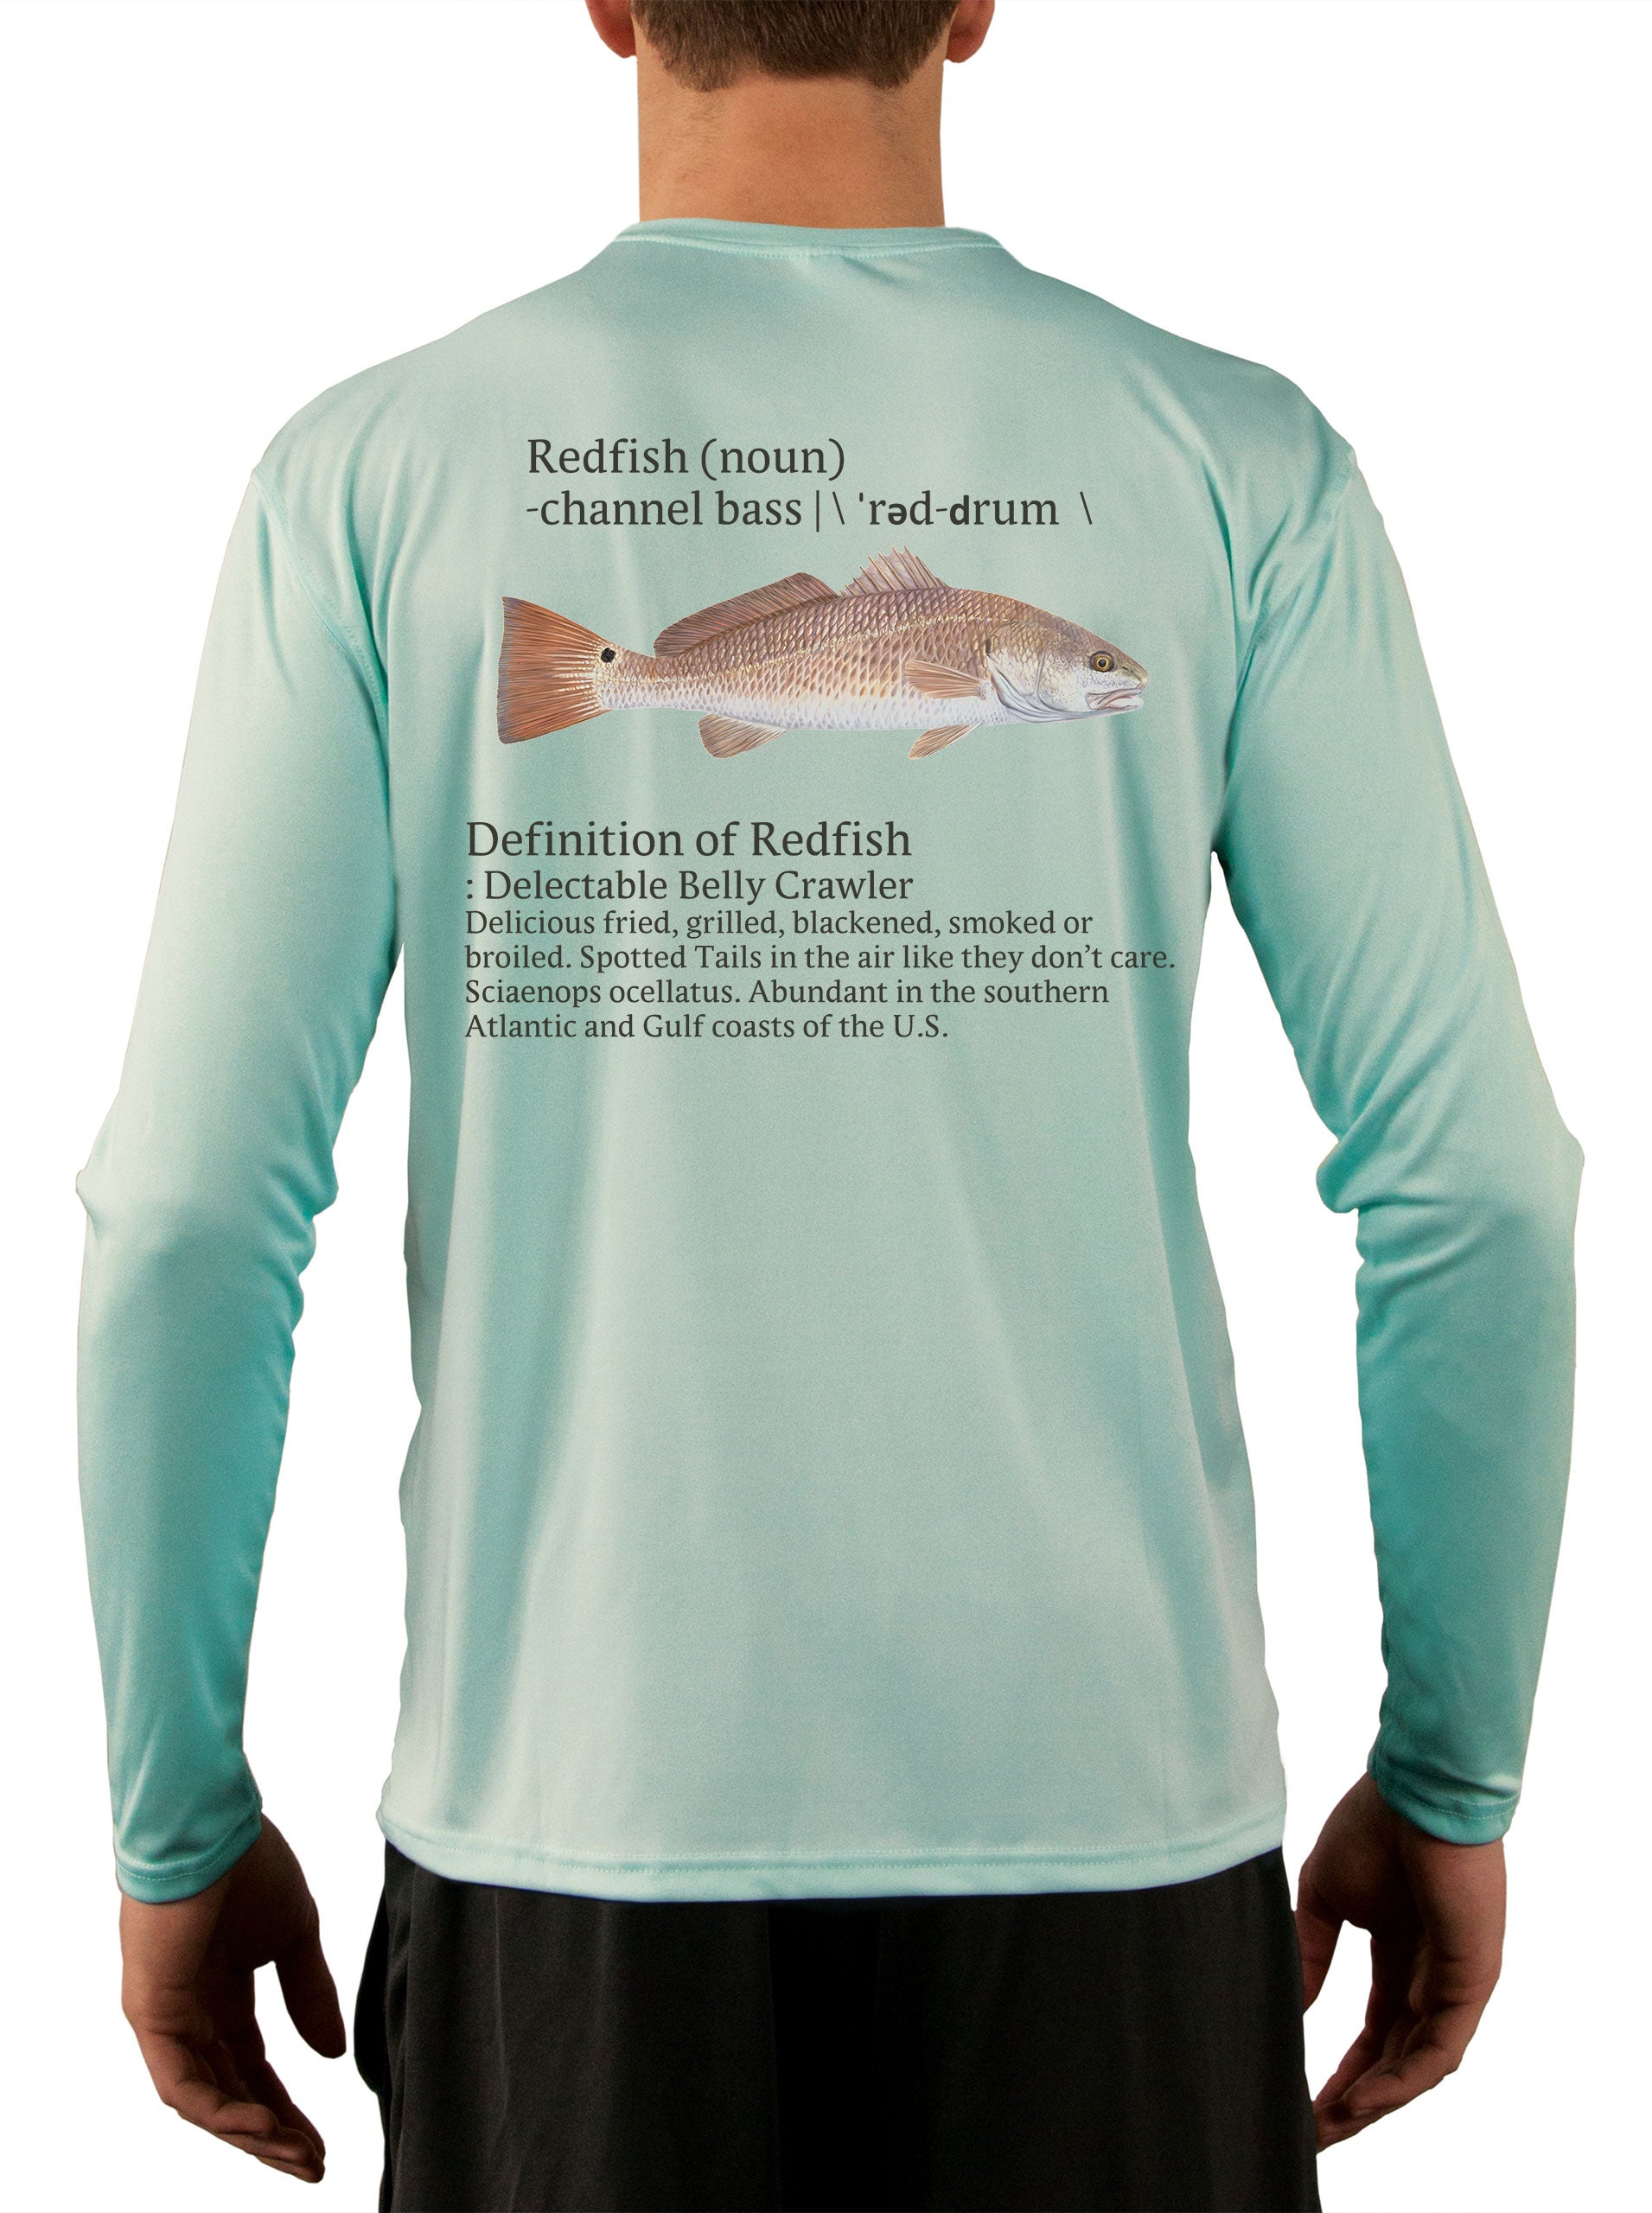 Redfish Fishing Shirts for Men Red Drum Channel Bass - UV Protected +50 Sun Protection with Moisture Wicking Technology - Skiff Life